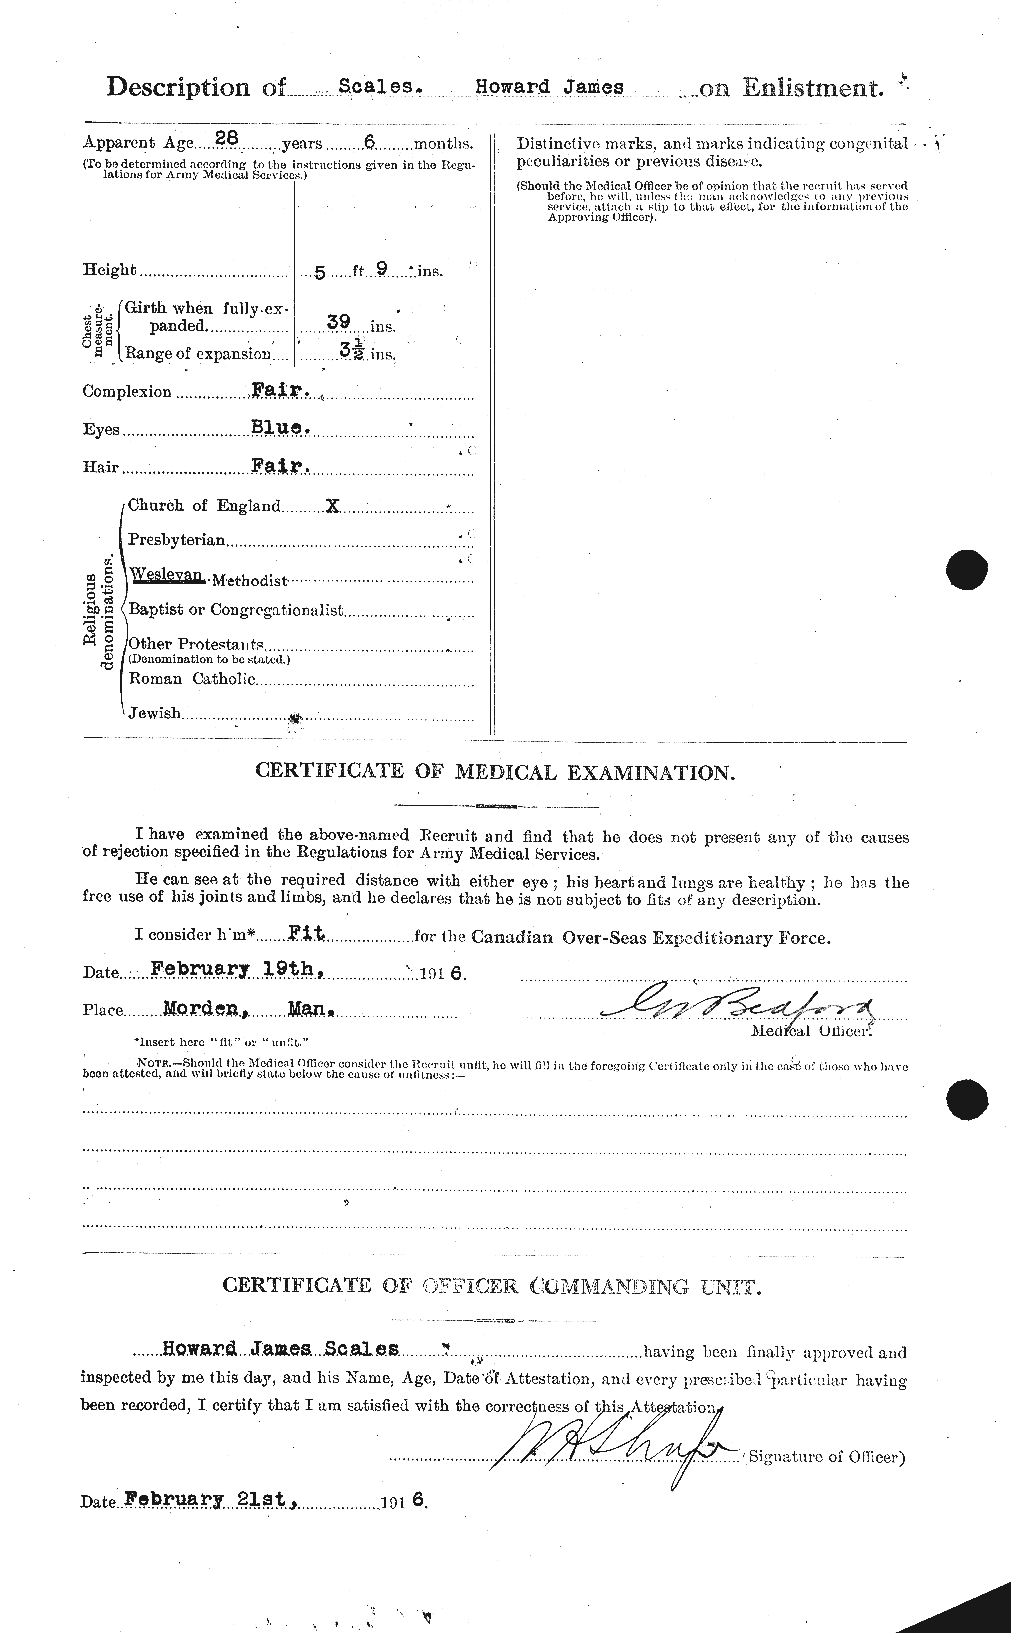 Personnel Records of the First World War - CEF 080794b